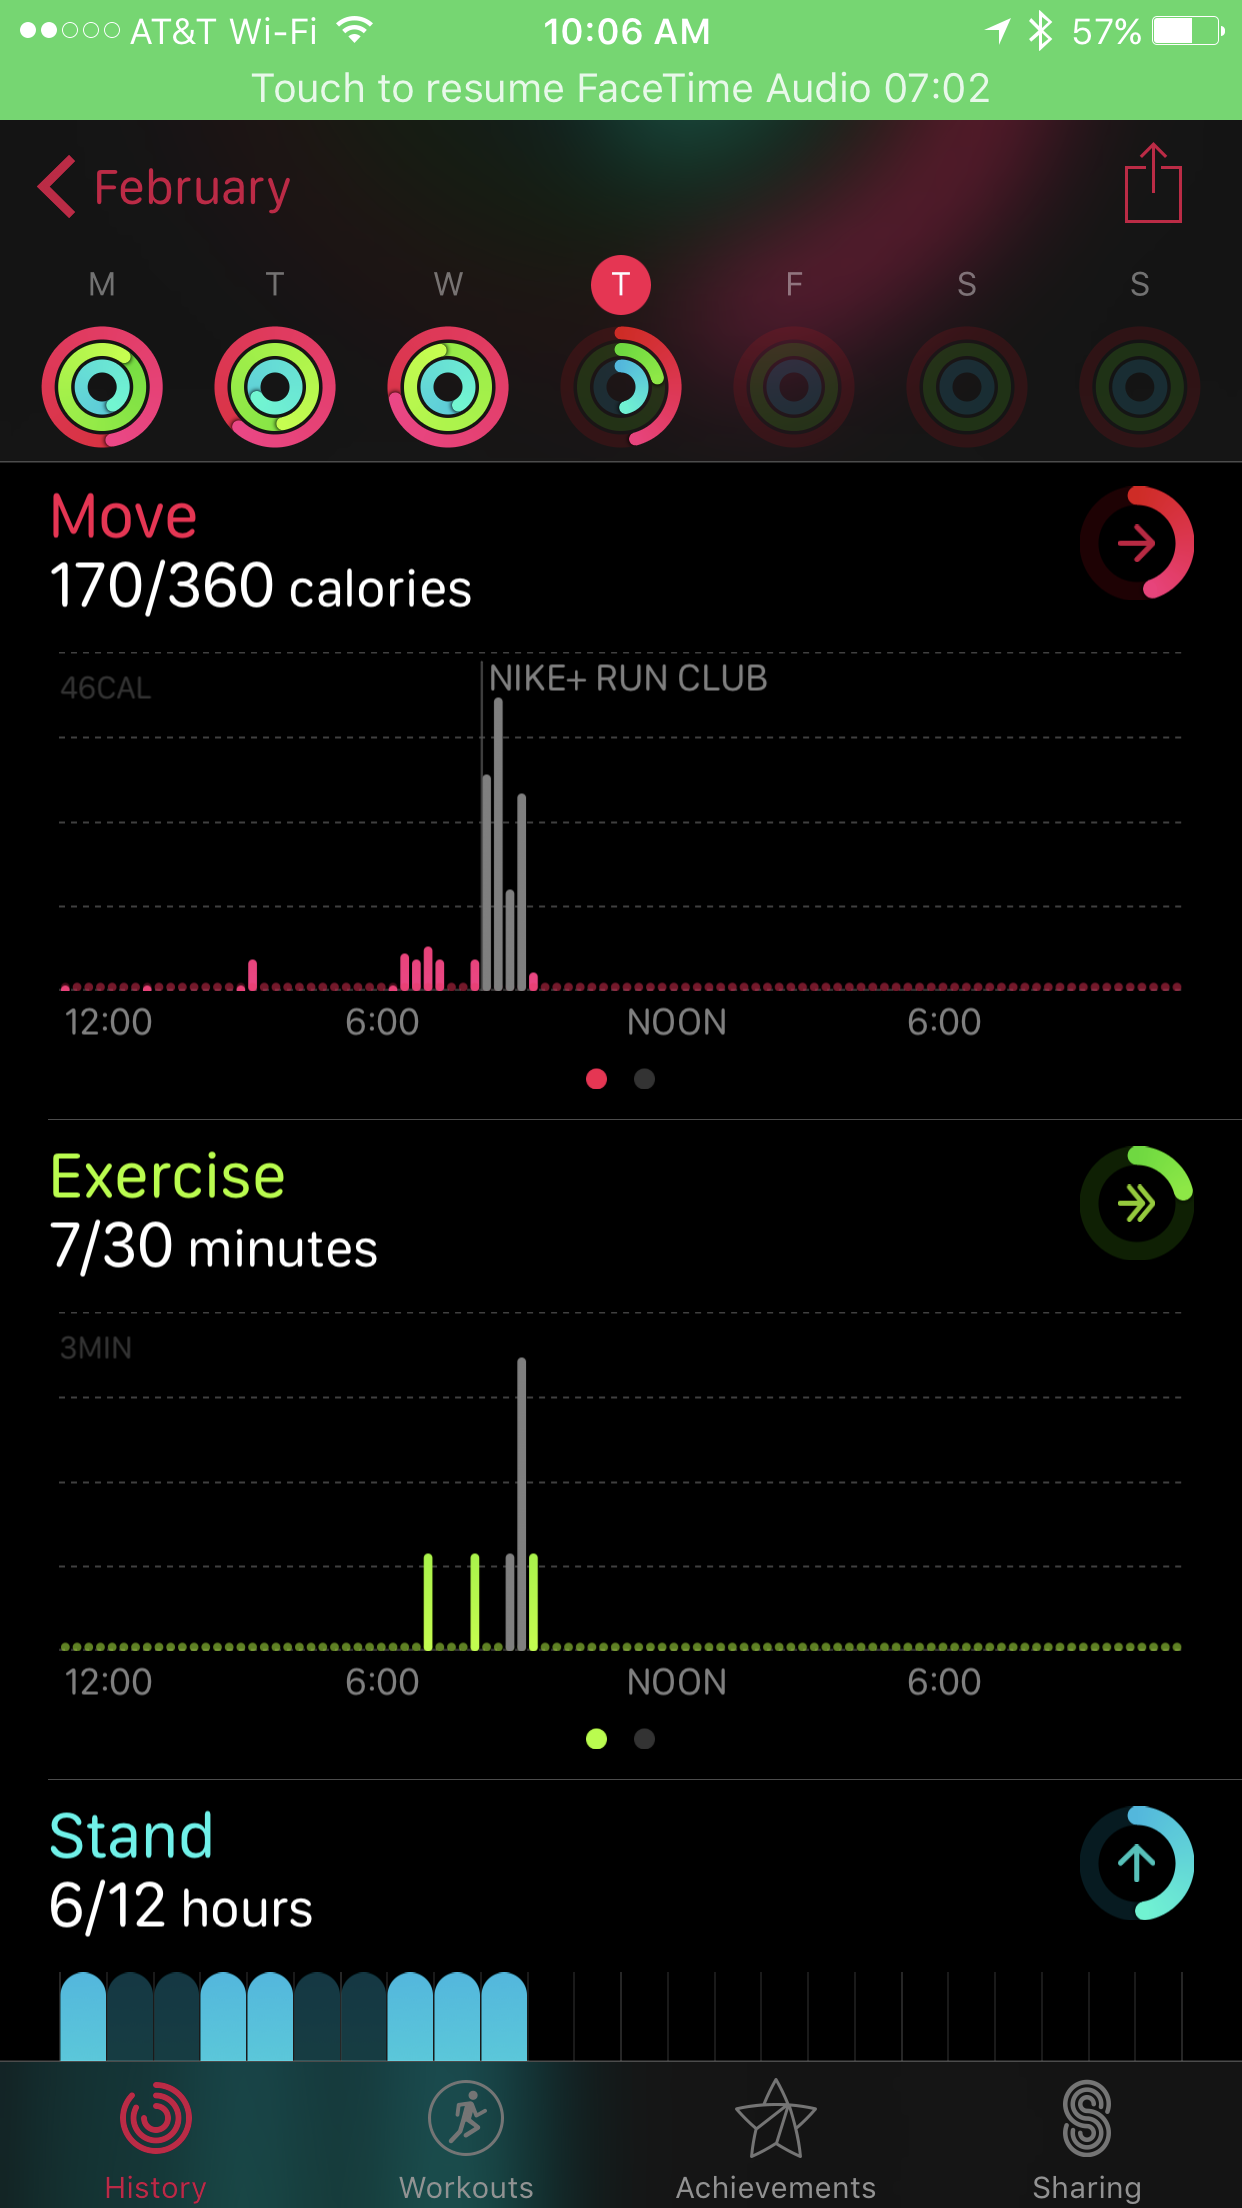 nike run app on apple watch not syncing with iphone